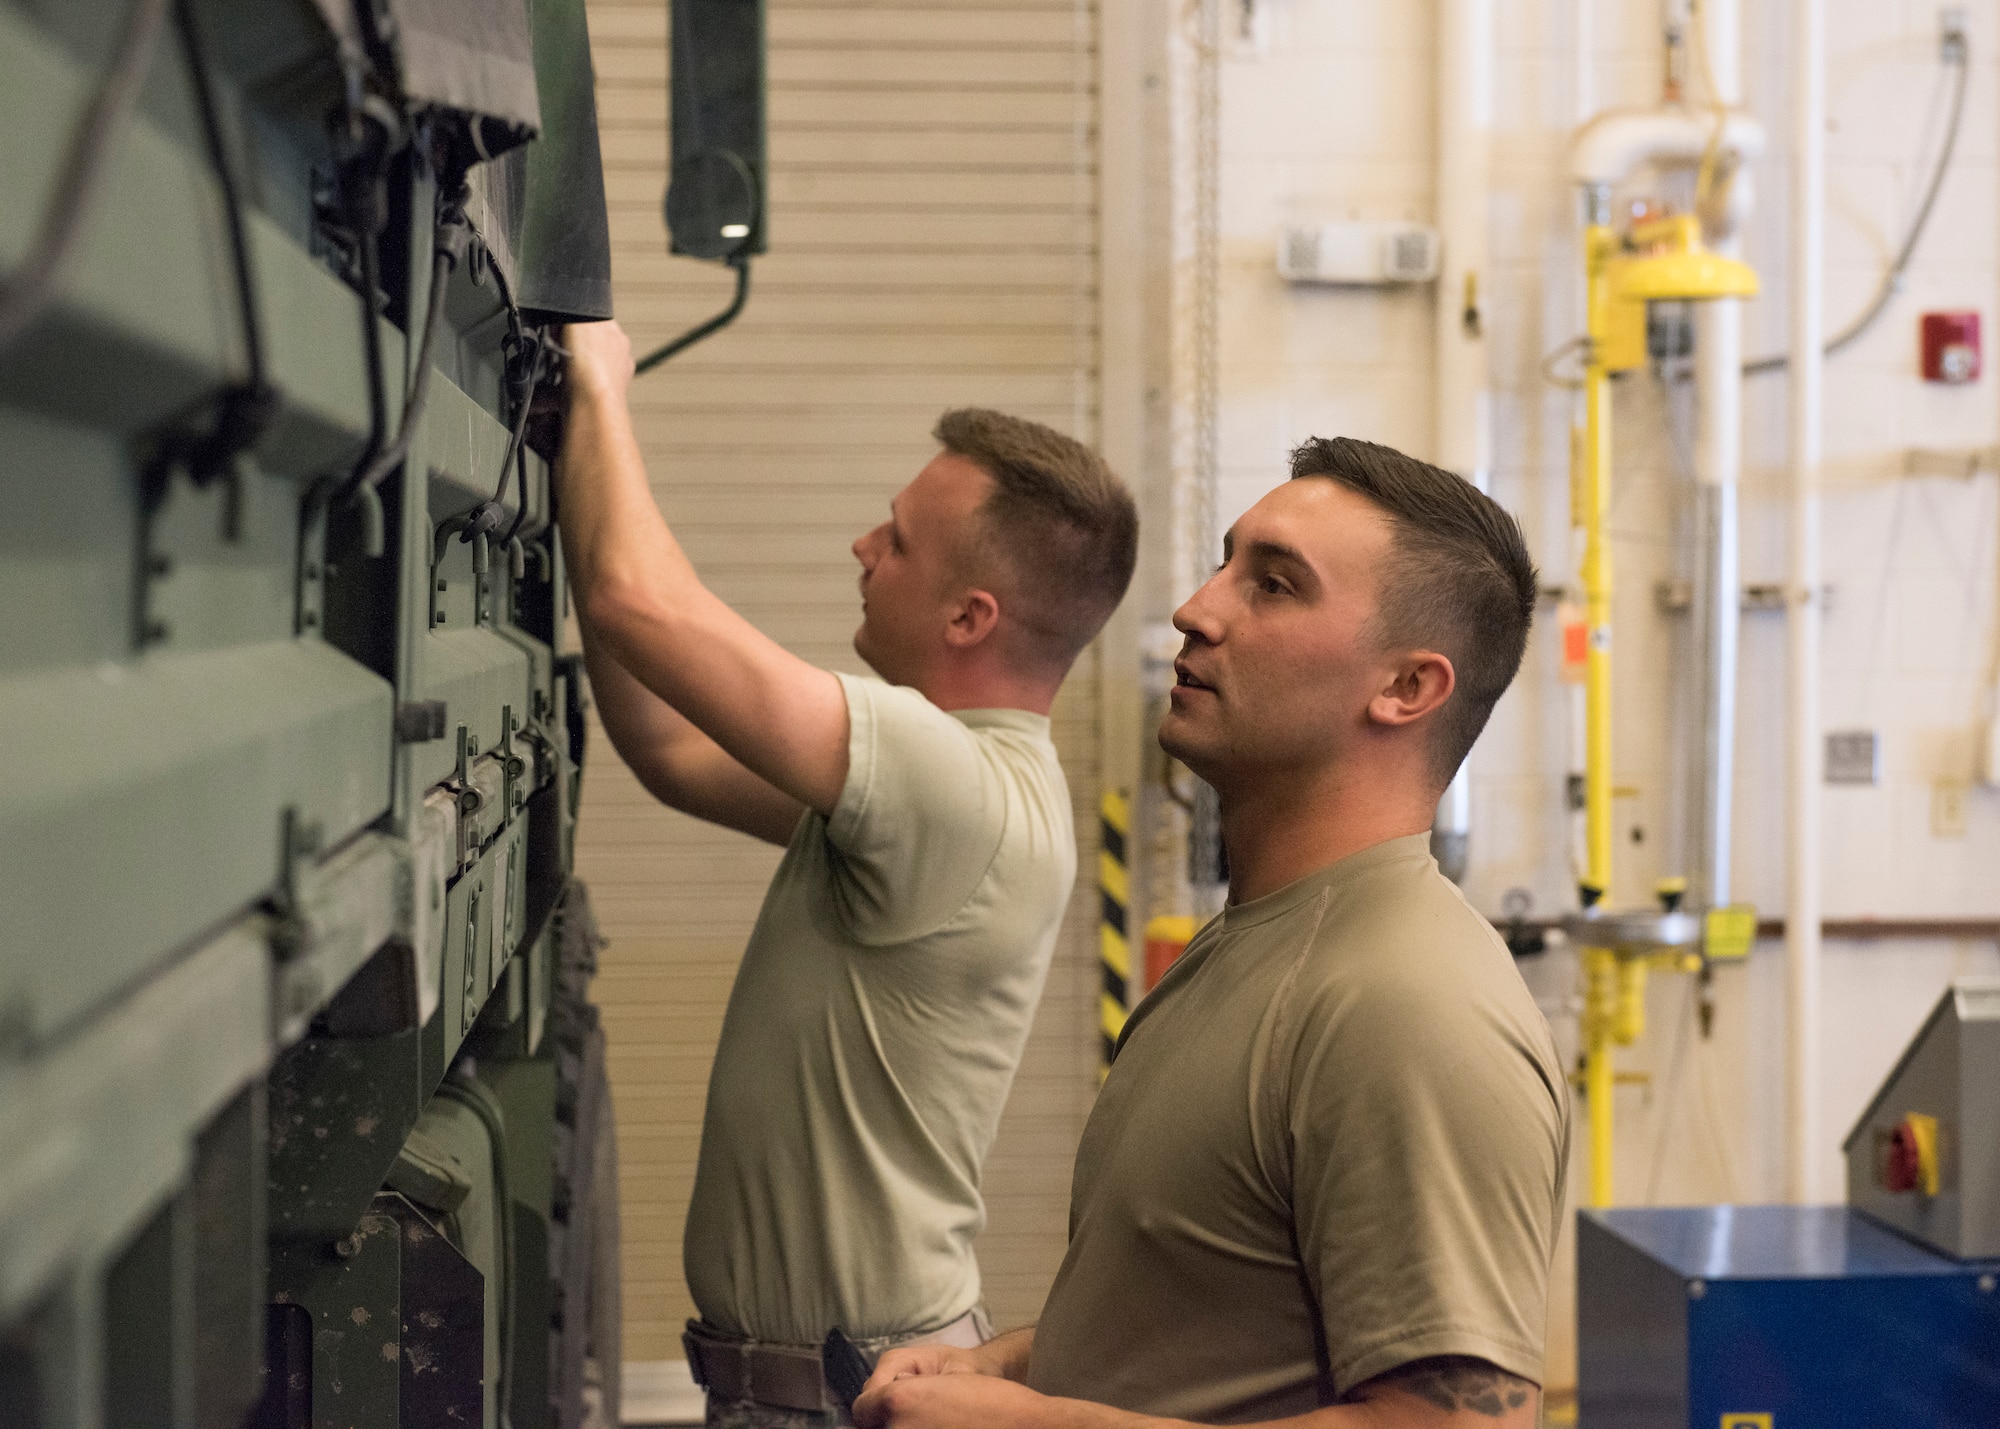 Senior Airman Tyler Duggar, 726th Air Control Squadron, and Senior Airman Randy Johnston, 726th ACS, tie down a Medium Tactical Vehicle cover in preparation for an exercise July 7, 2019, at Mountain Home Air Force Base, Idaho. Airmen from the 726th ACS work around the clock to ensure they are prepared for thier deployment exercises. (U.S. Air Force photo by Senior Airman Tyrell Hall)